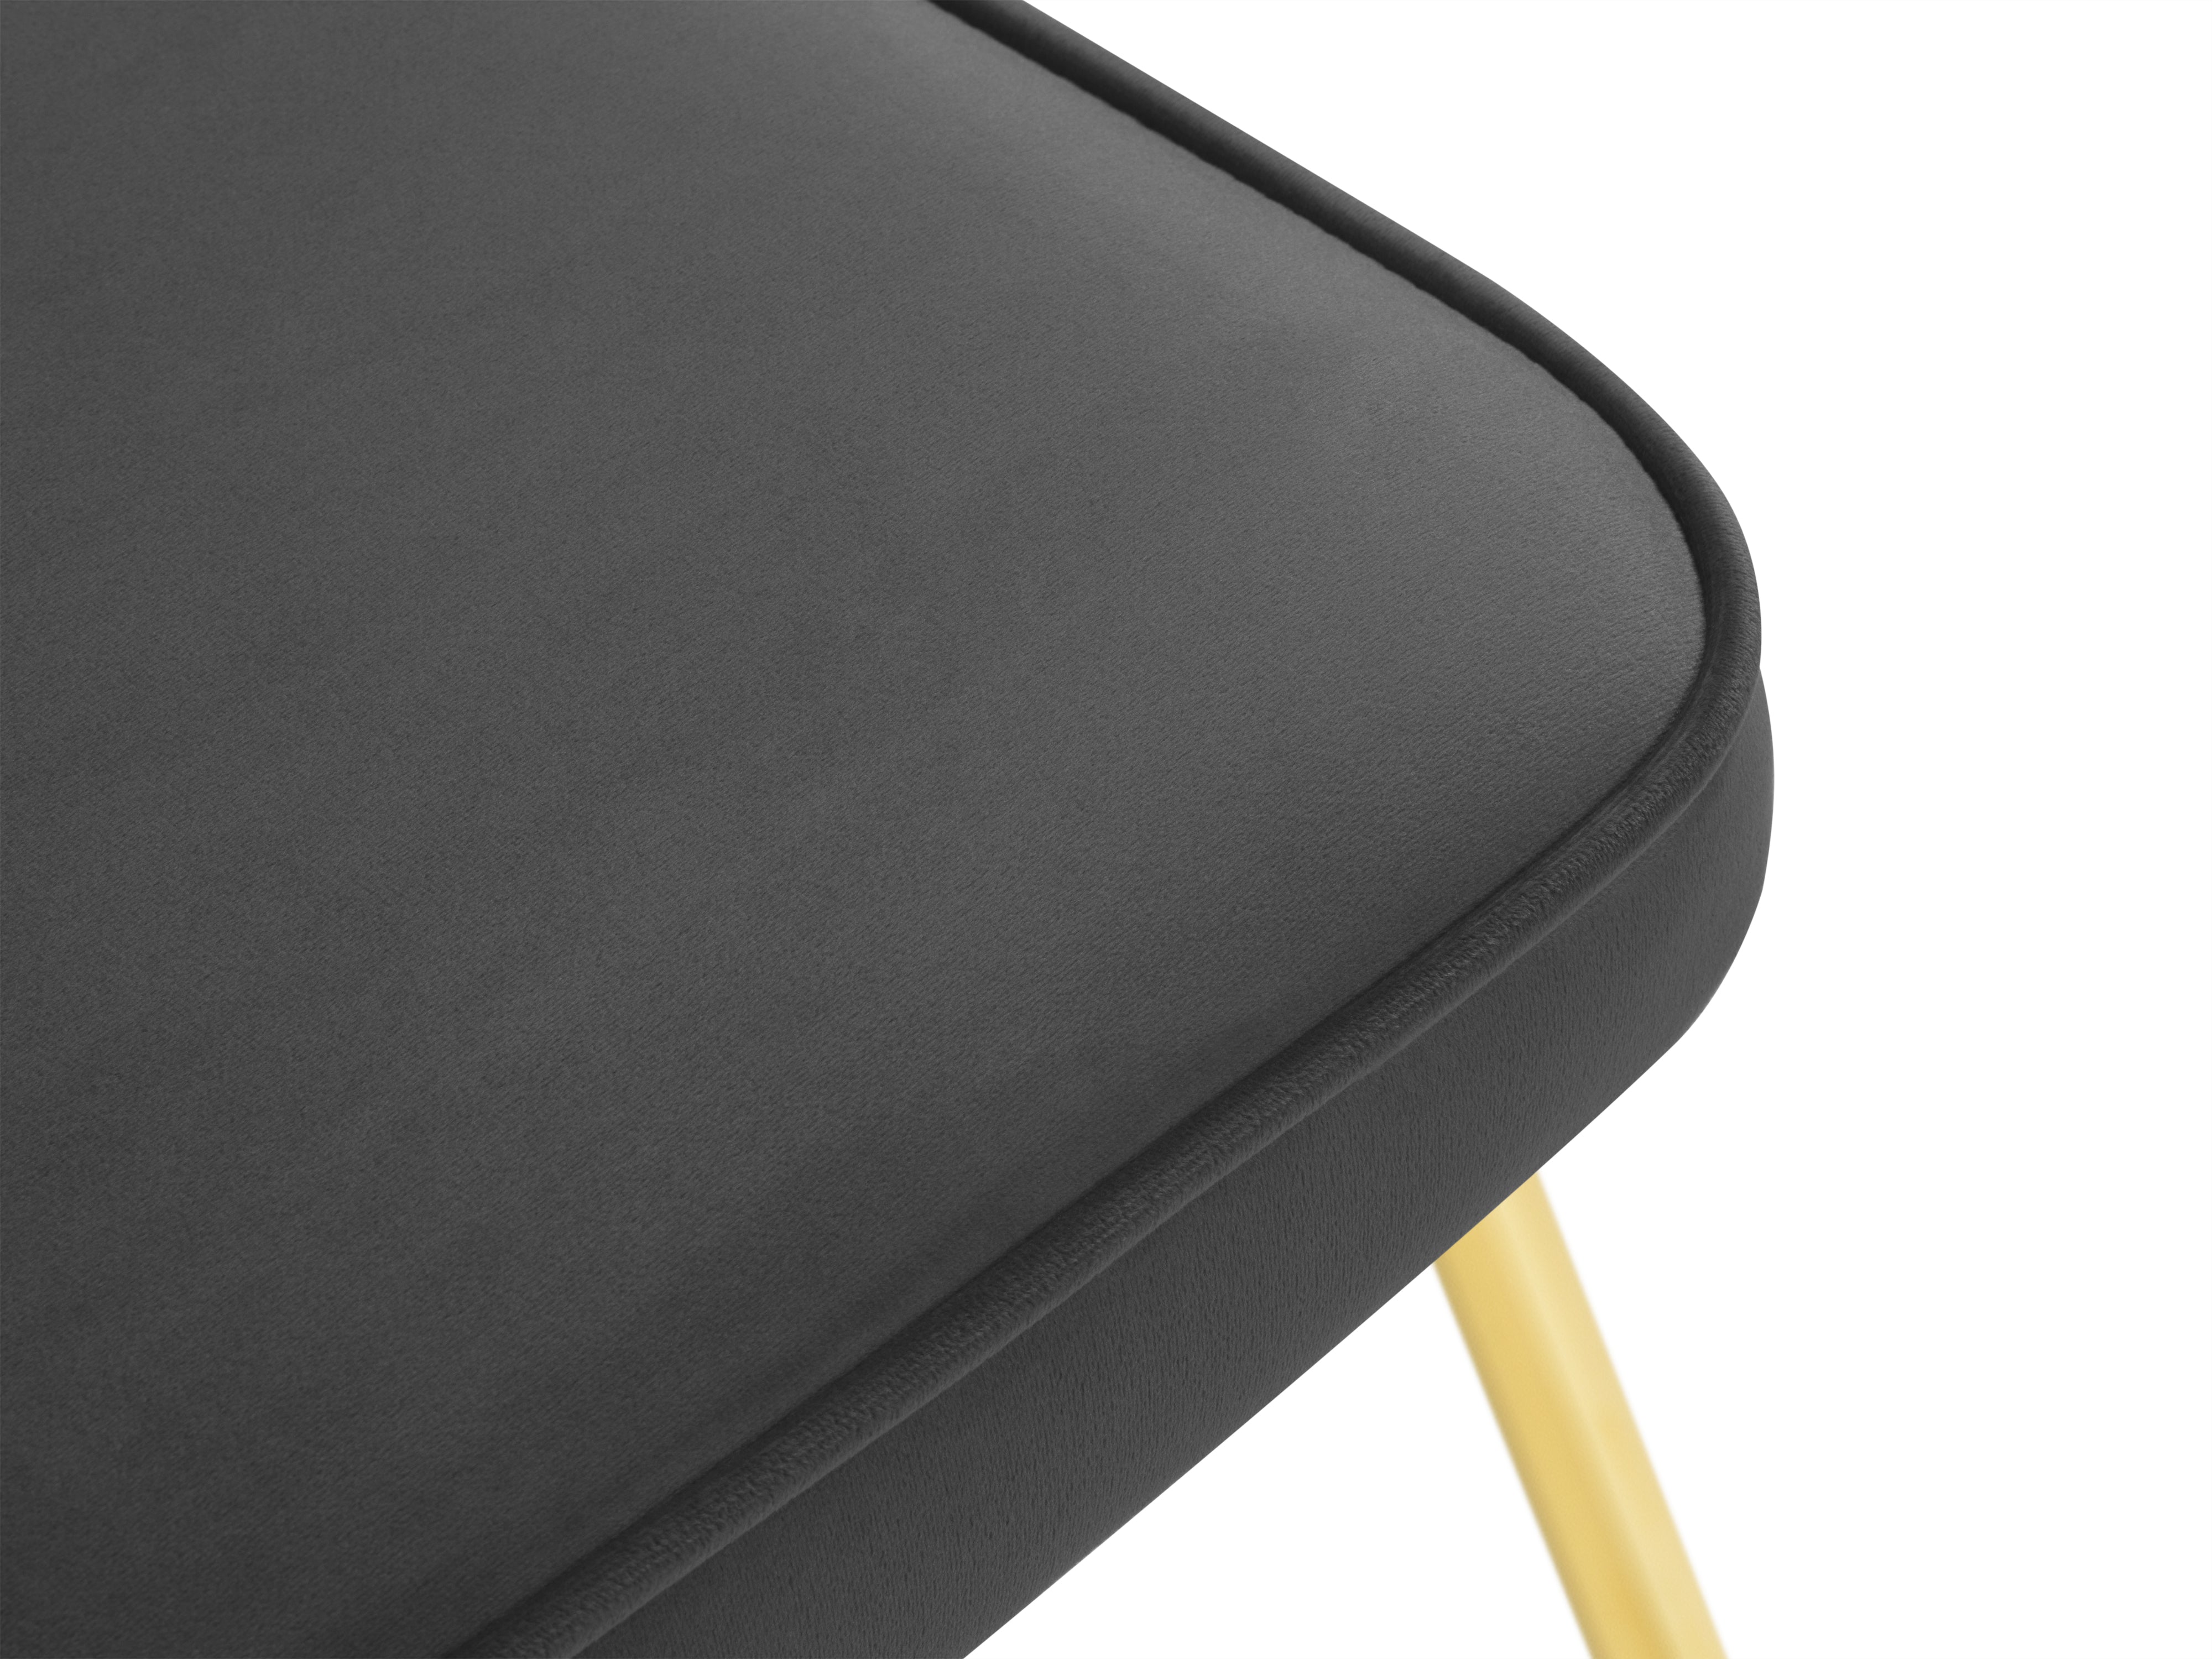 A dark gray chair with a golden base